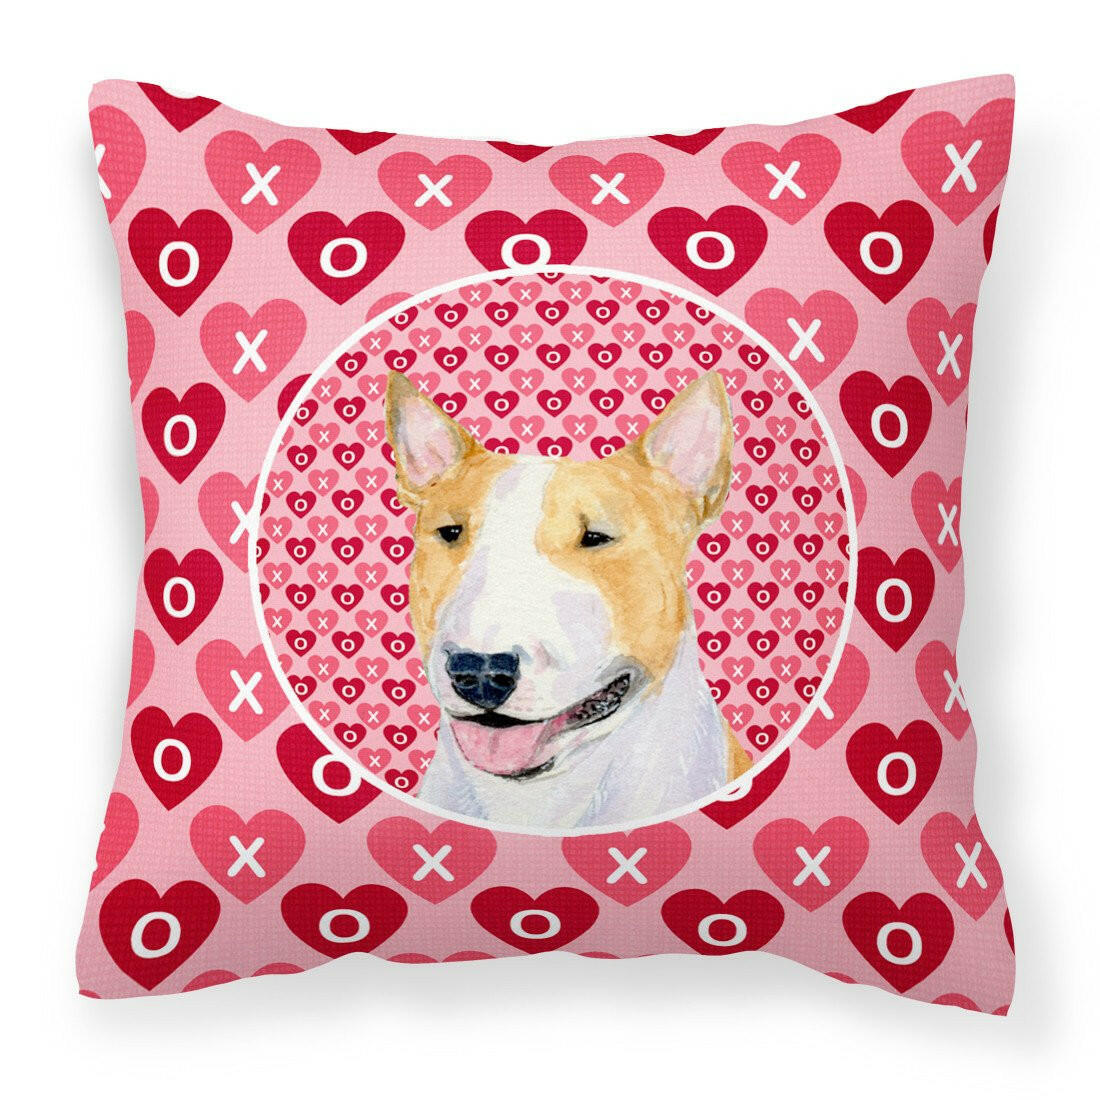 Bull Terrier Hearts Love and Valentine's Day Portrait Fabric Decorative Pillow SS4496PW1414 by Caroline's Treasures